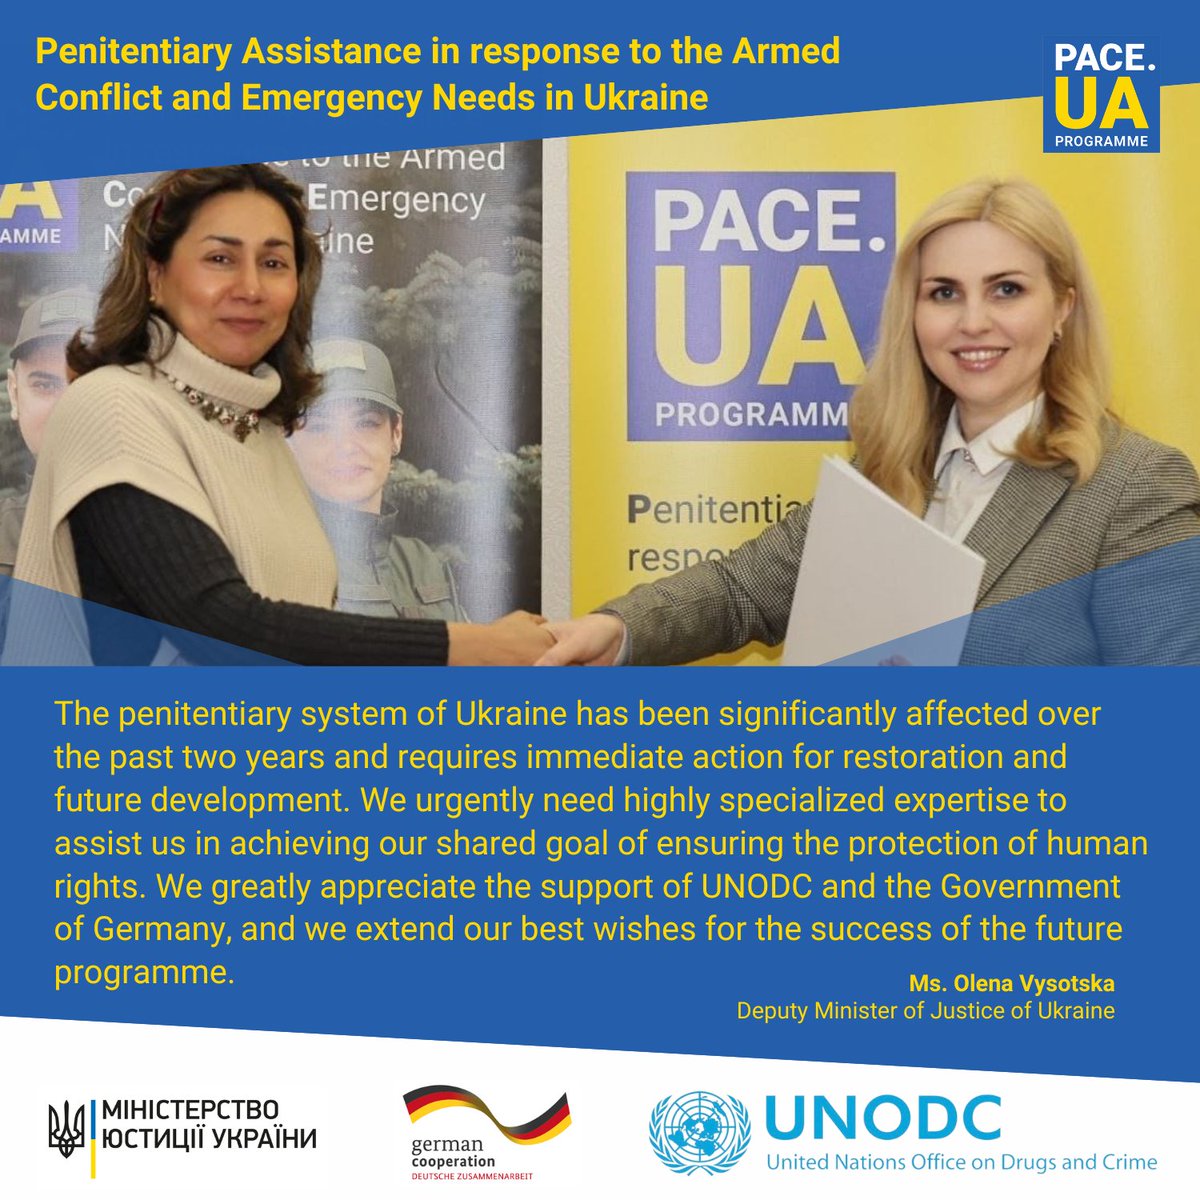 This week @UNODC & @minjust_gov_ua launched a 2-yr program to strengthen effectiveness, crisis readiness and response capacity in Ukraine’s prison service in line with international & European prison standards. With thanks to 🇩🇪 @AA_stabilisiert @GermanyinUA @UNODCRPOEE